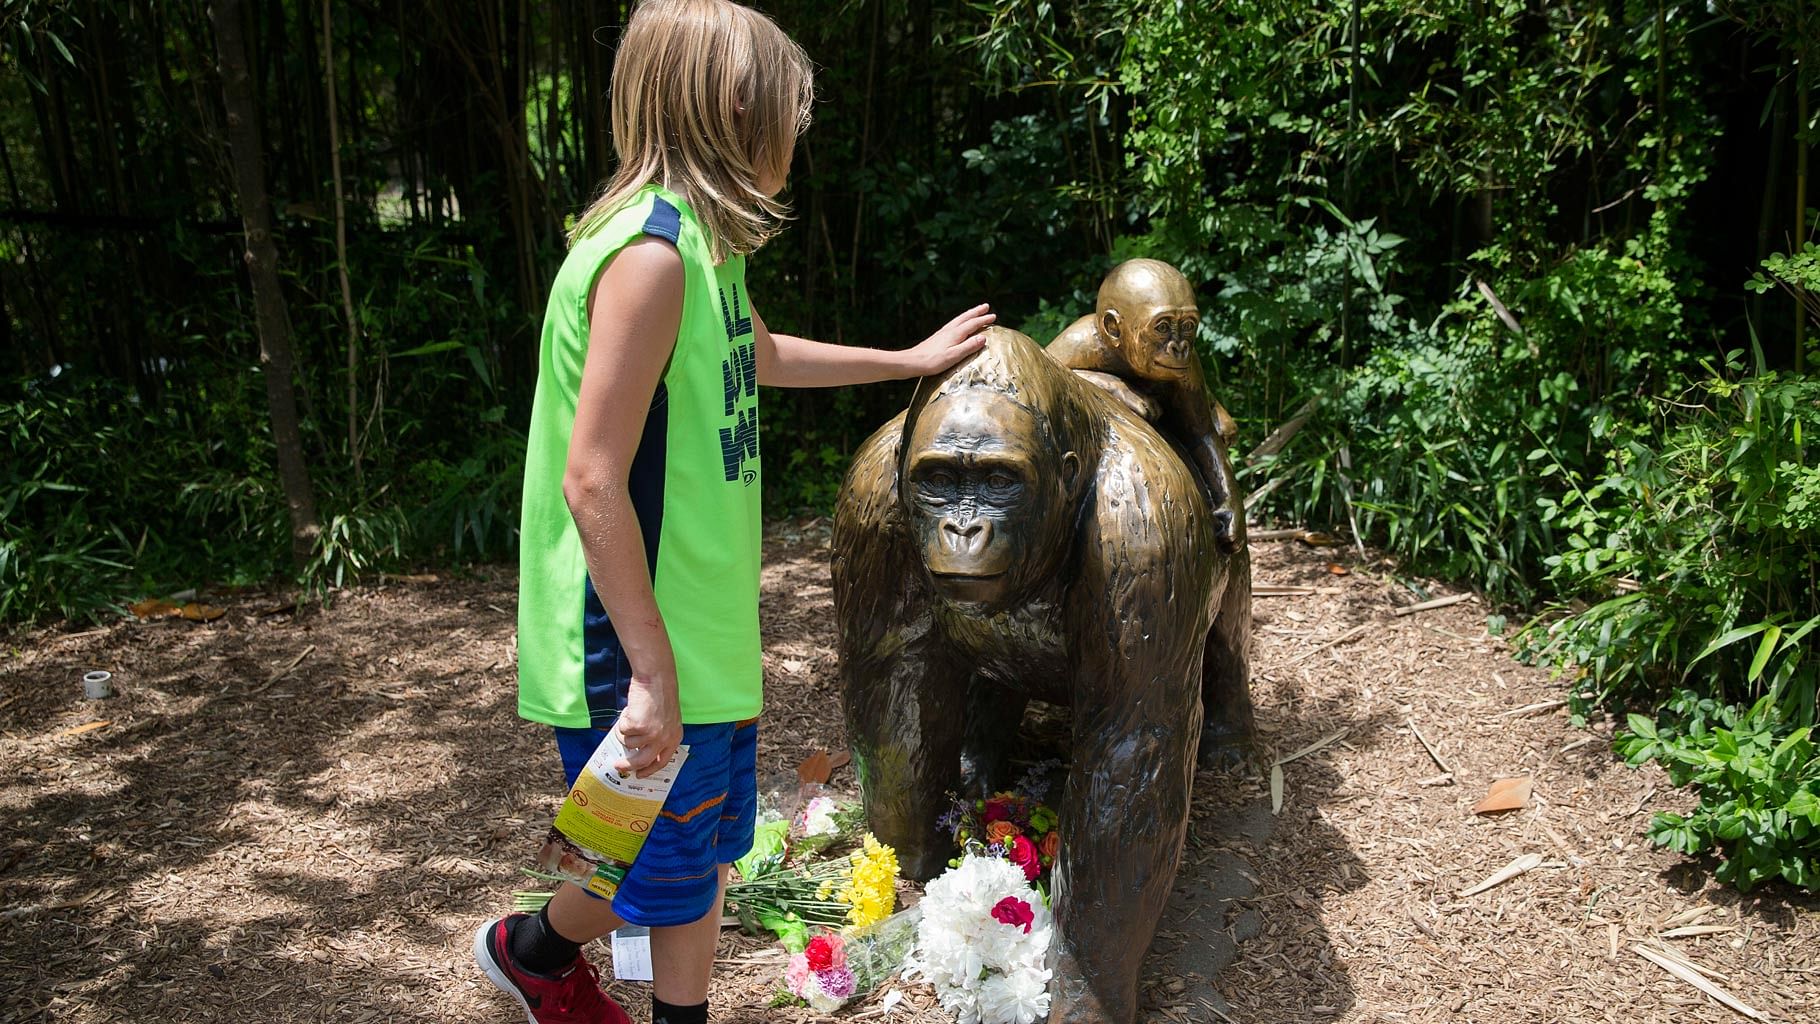 A child touches the head of a gorilla statue where flowers have been placed outside the Gorilla World exhibit at the Cincinnati Zoo &amp; Botanical Garden on 29 May 2016. (Photo: AP)